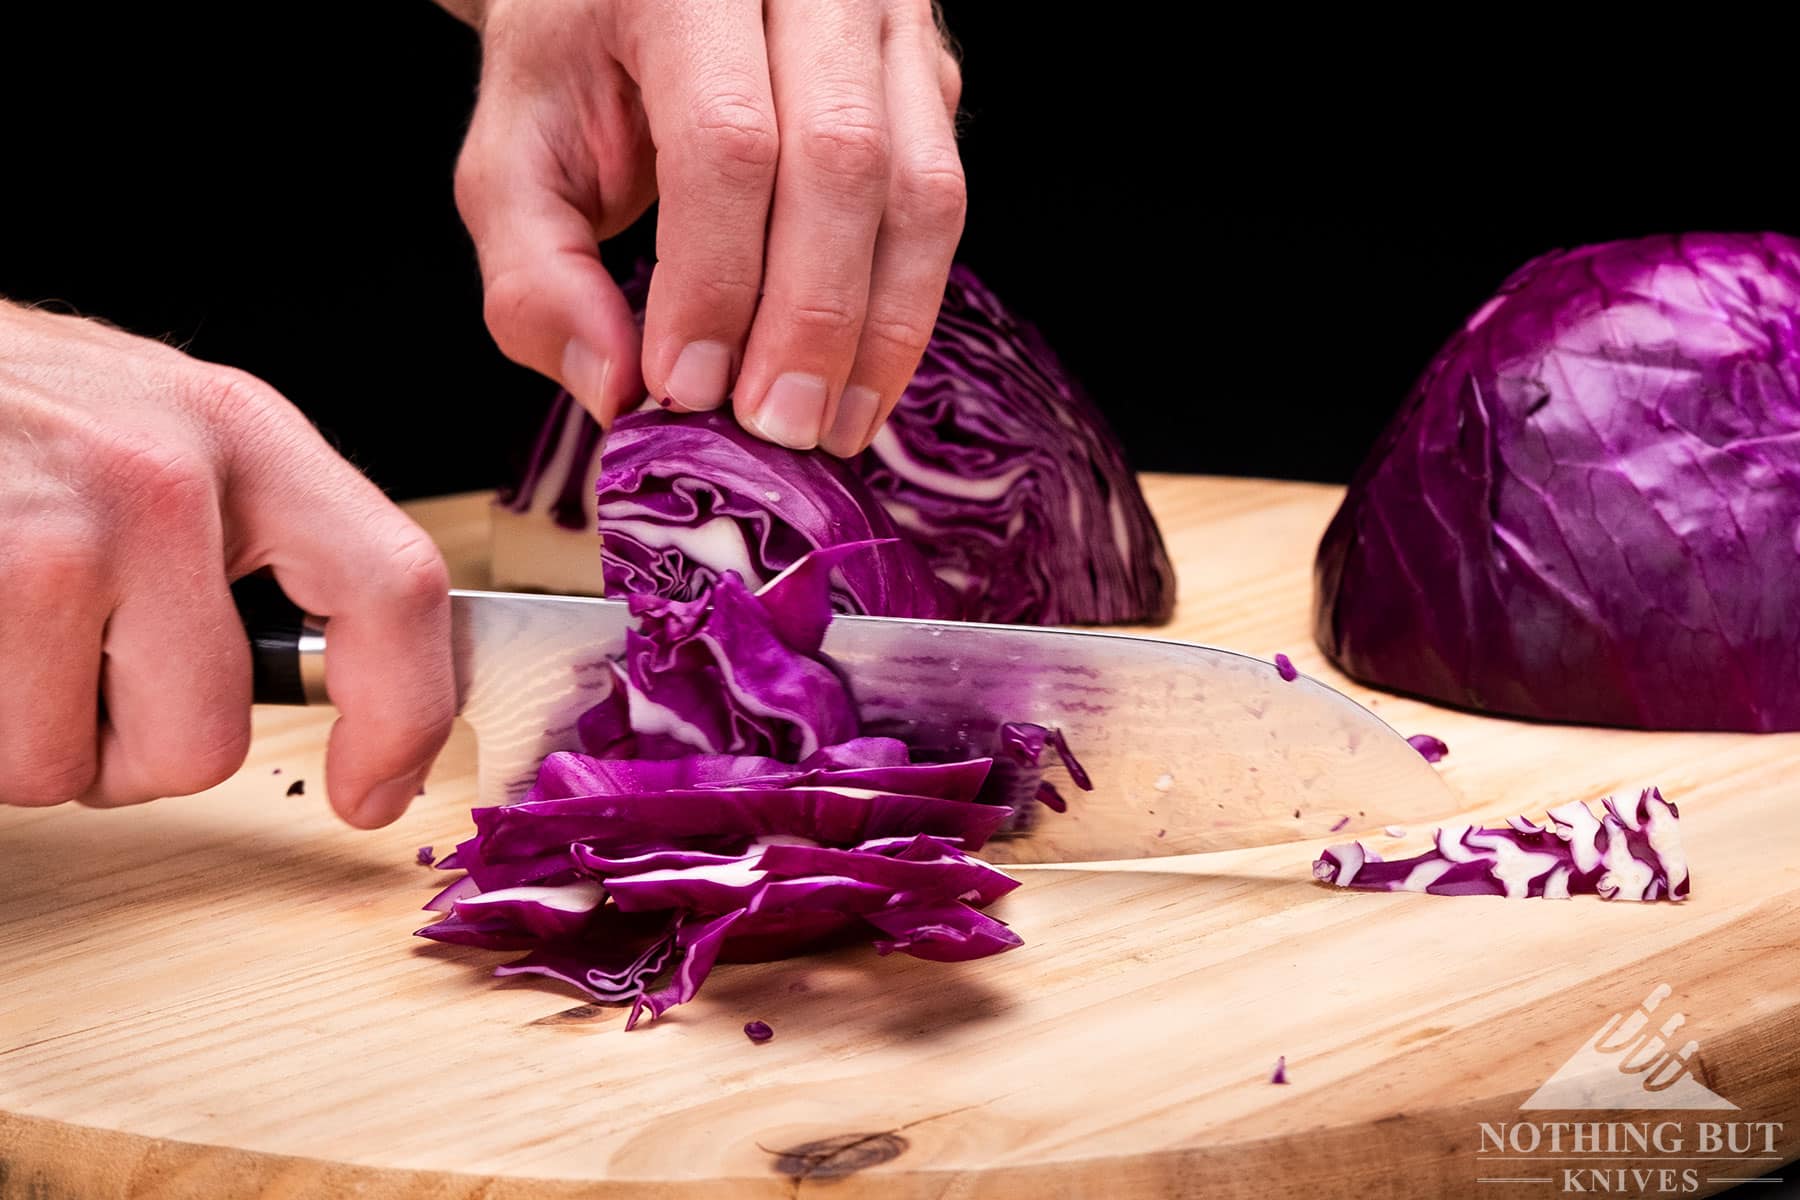 The Shun Classic chef knife slicing red cabbage on a wood cutting board.